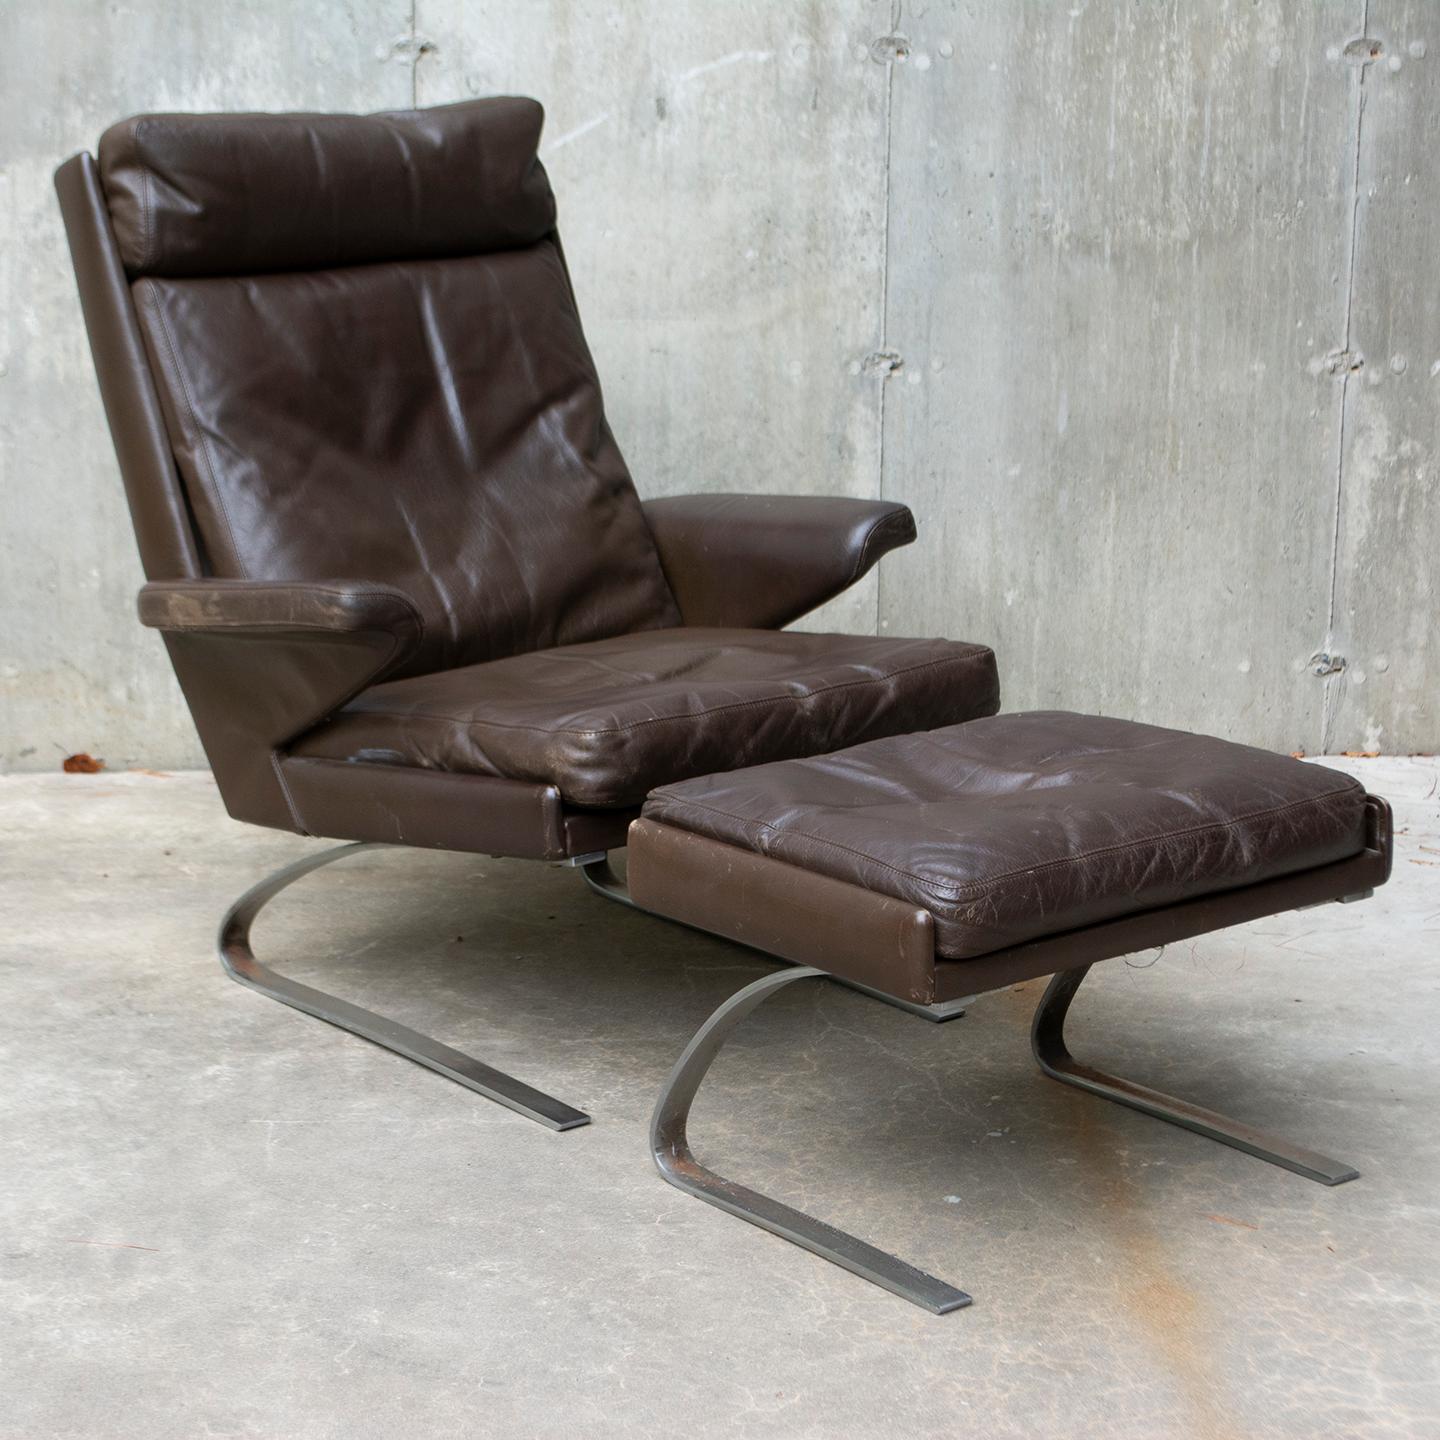 Swing lounge chair with ottoman designed by Reinhold Adolf and Hans-Jürgen Schröpfer for COR Germany. This set has a brushed steel frame and comes in its original dark brown leather patinated by age and use. Some areas show more wear and fade but